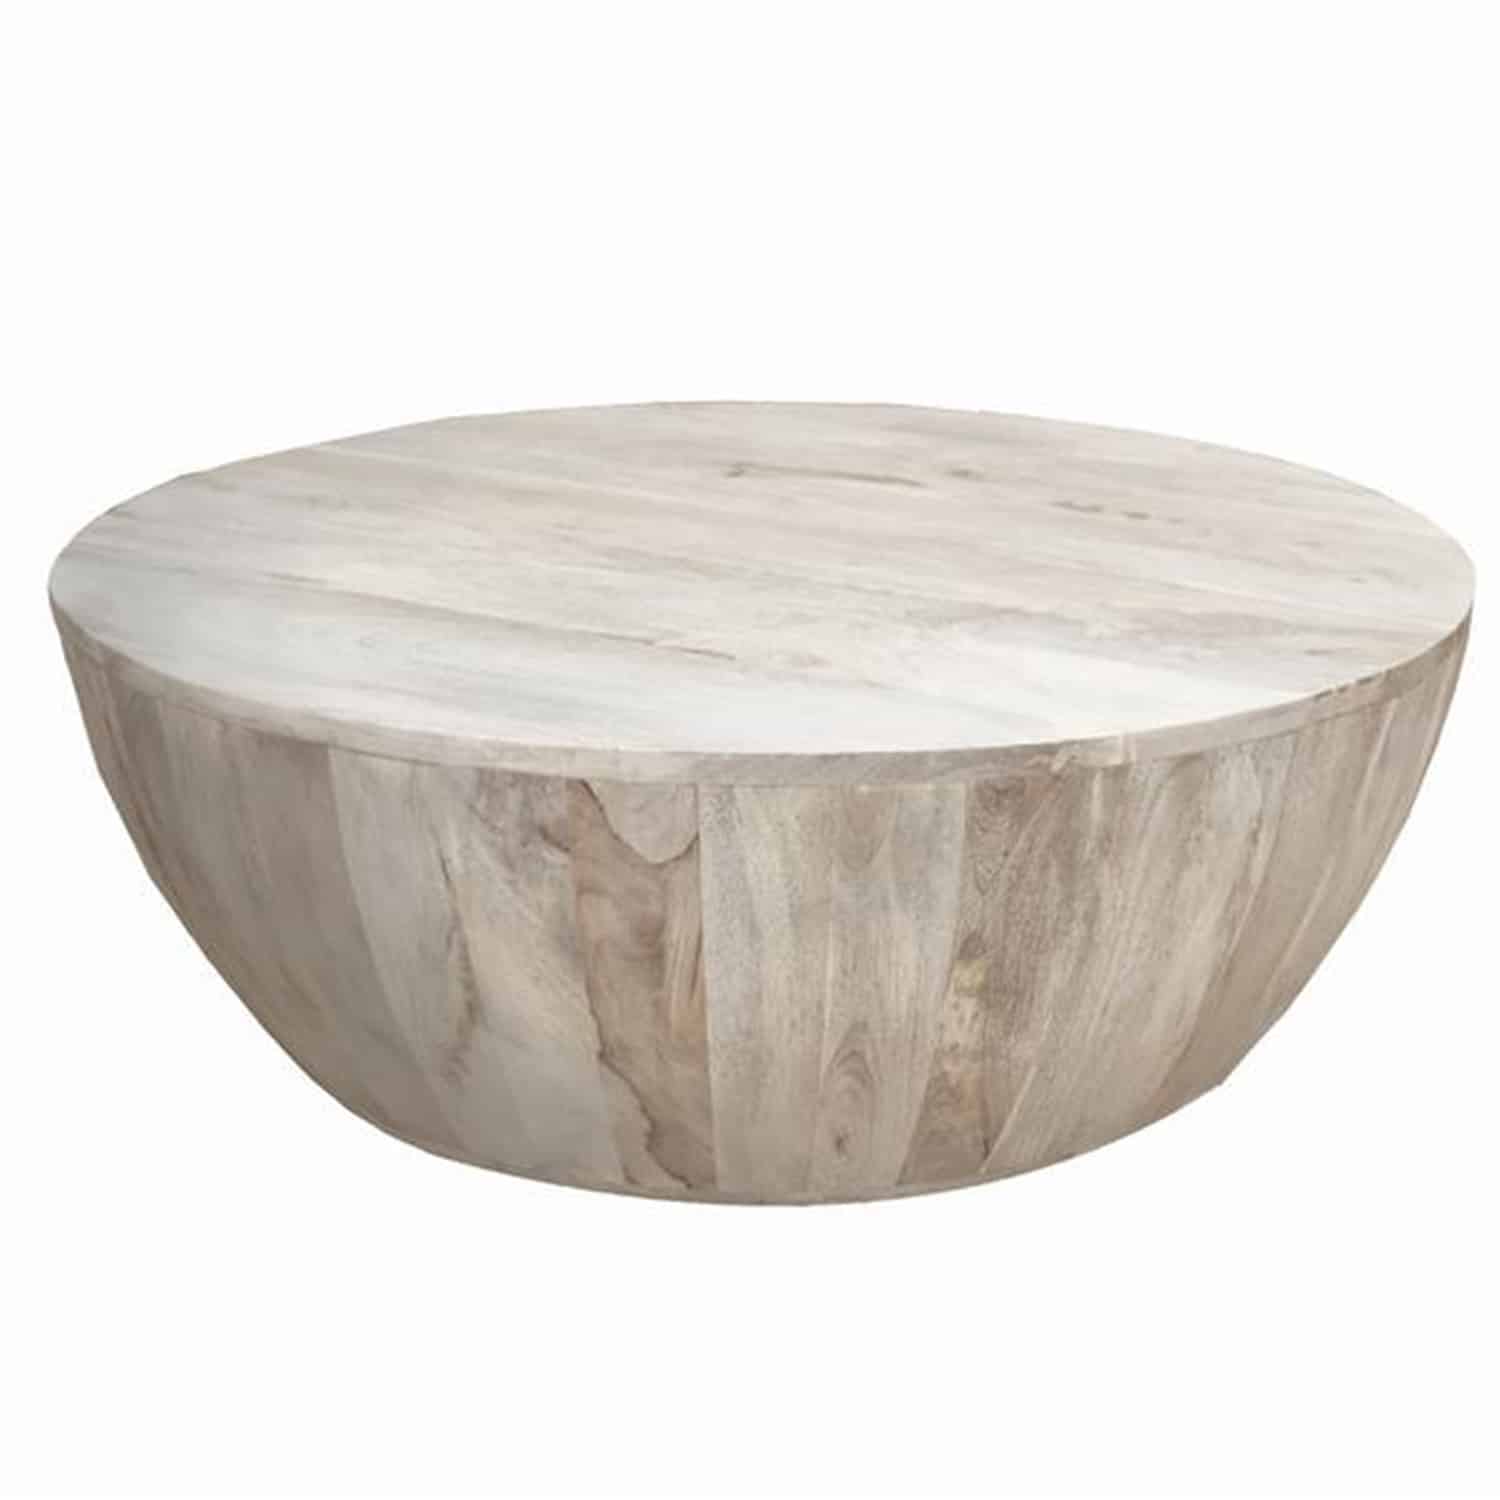 Distressed Mango Wood Coffee Table in Round Shape, Washed Light Brown ...